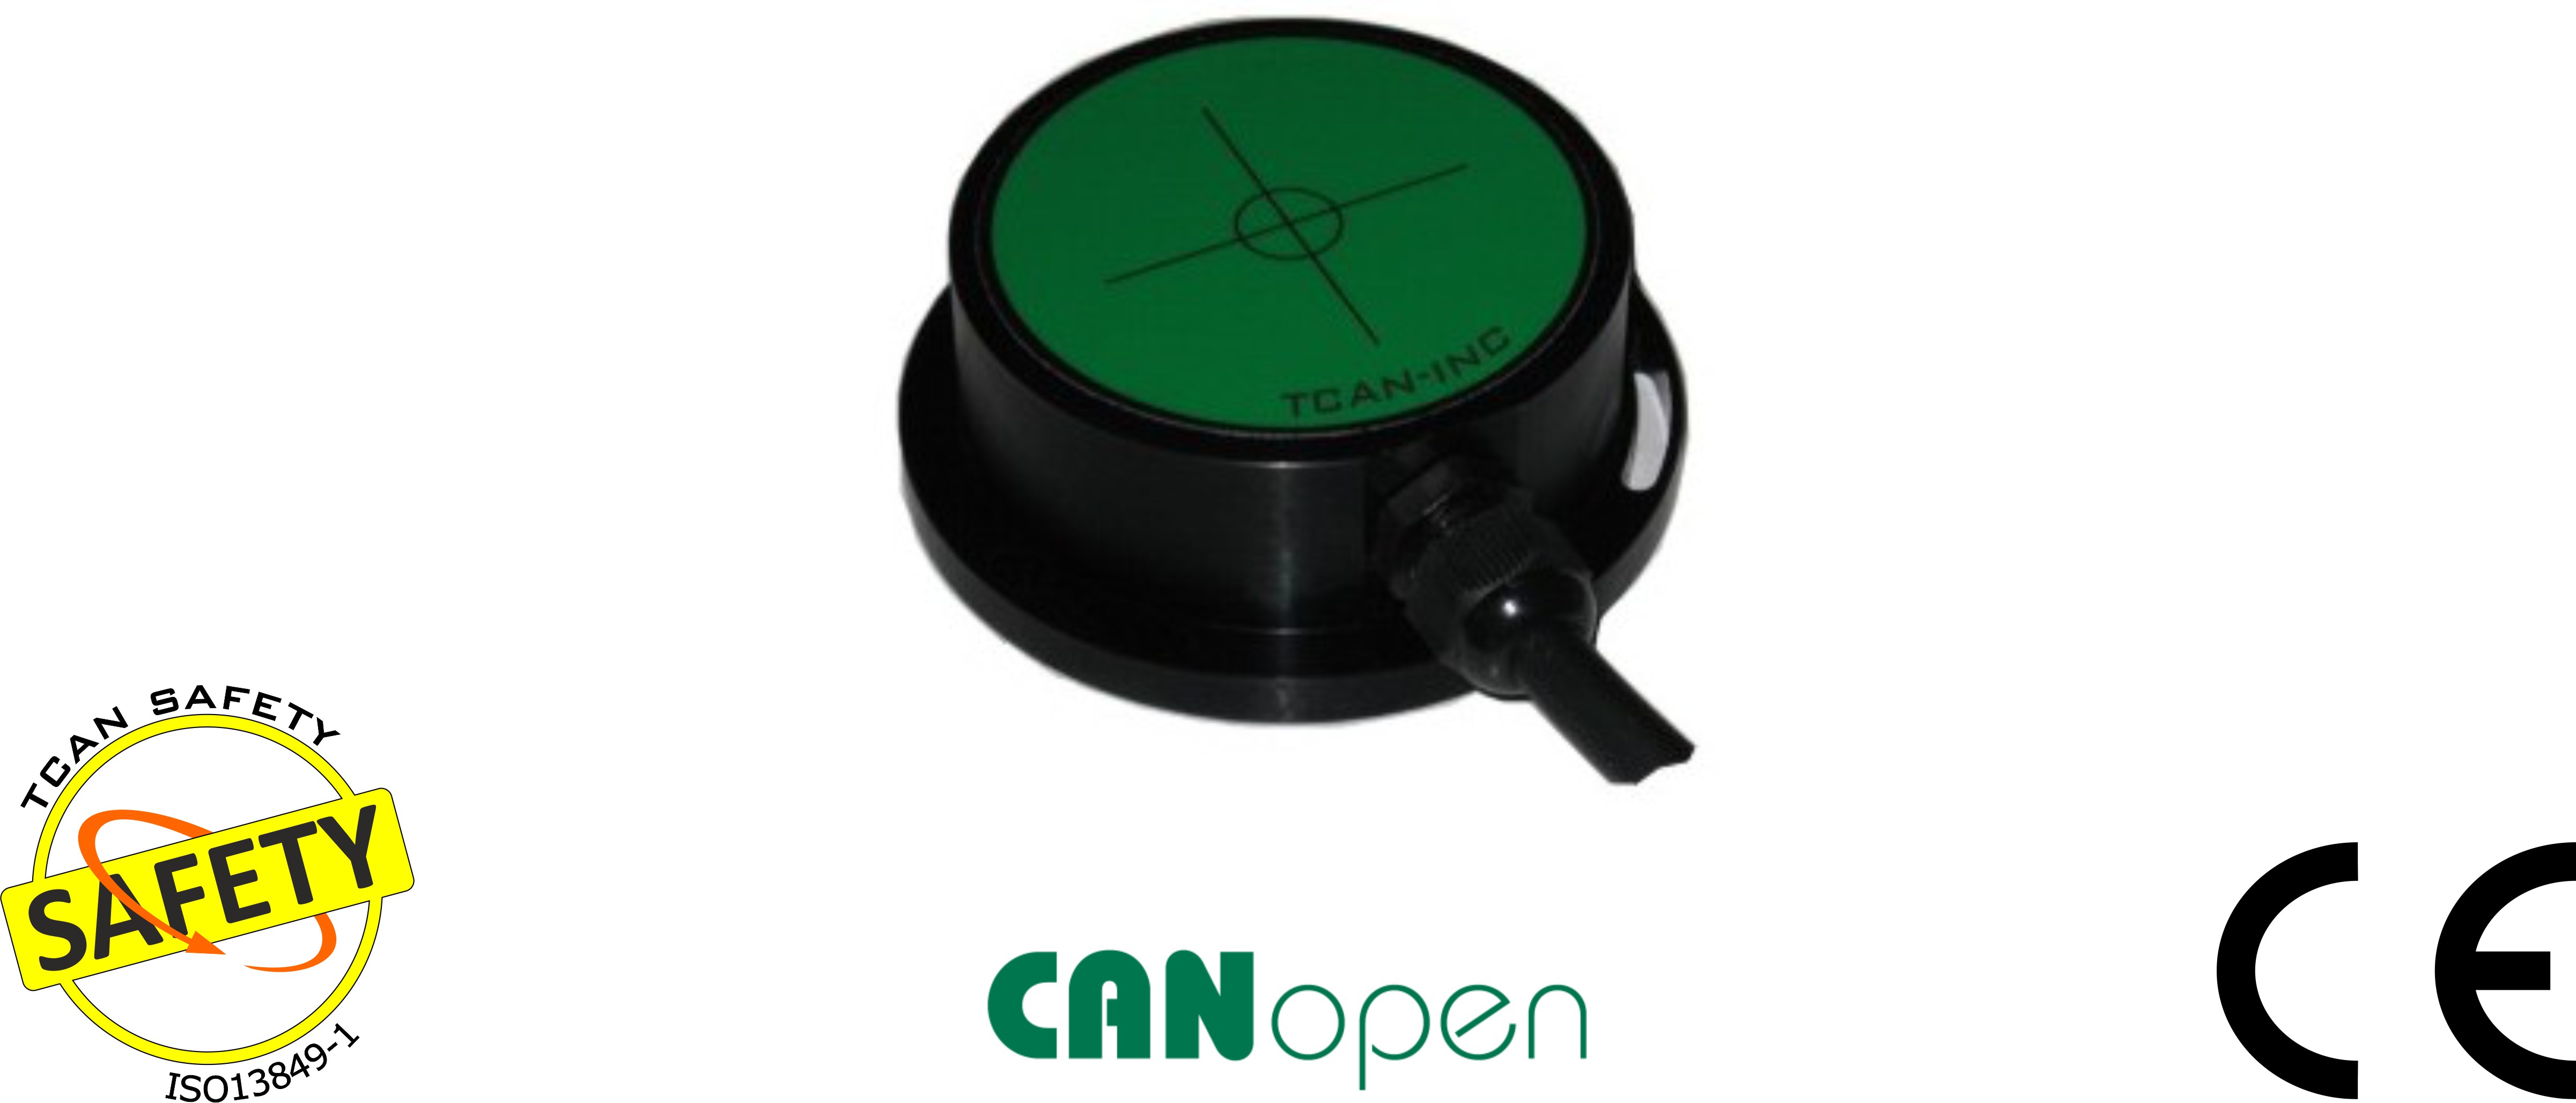 TCAN-CPS-image